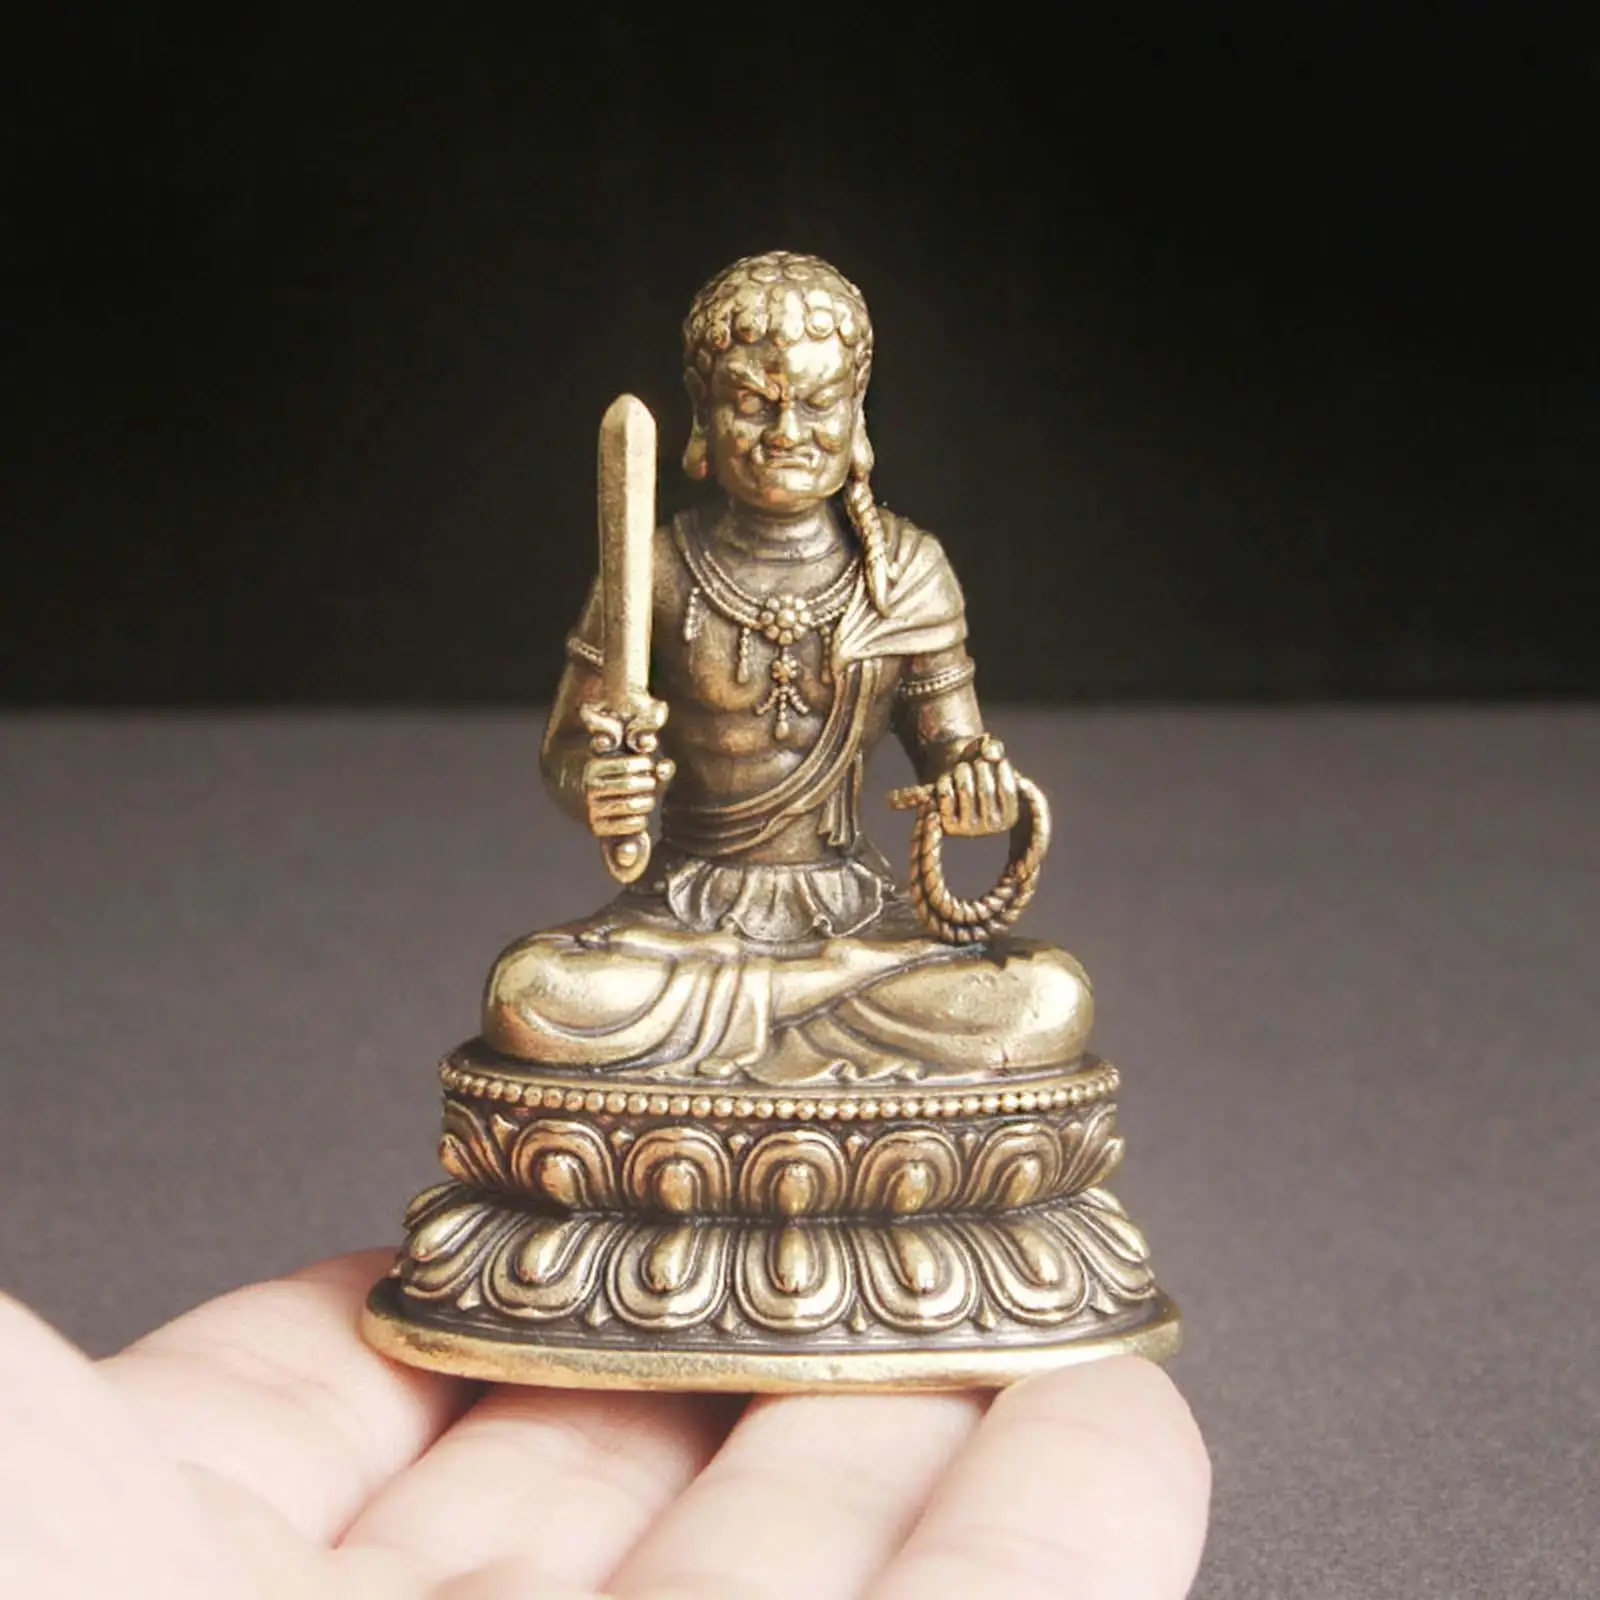 Collectible Sculpture Meditating Figurines Vintage Ornament Buddha Statue for Tabletop Collectibles Home Cabinet Accent